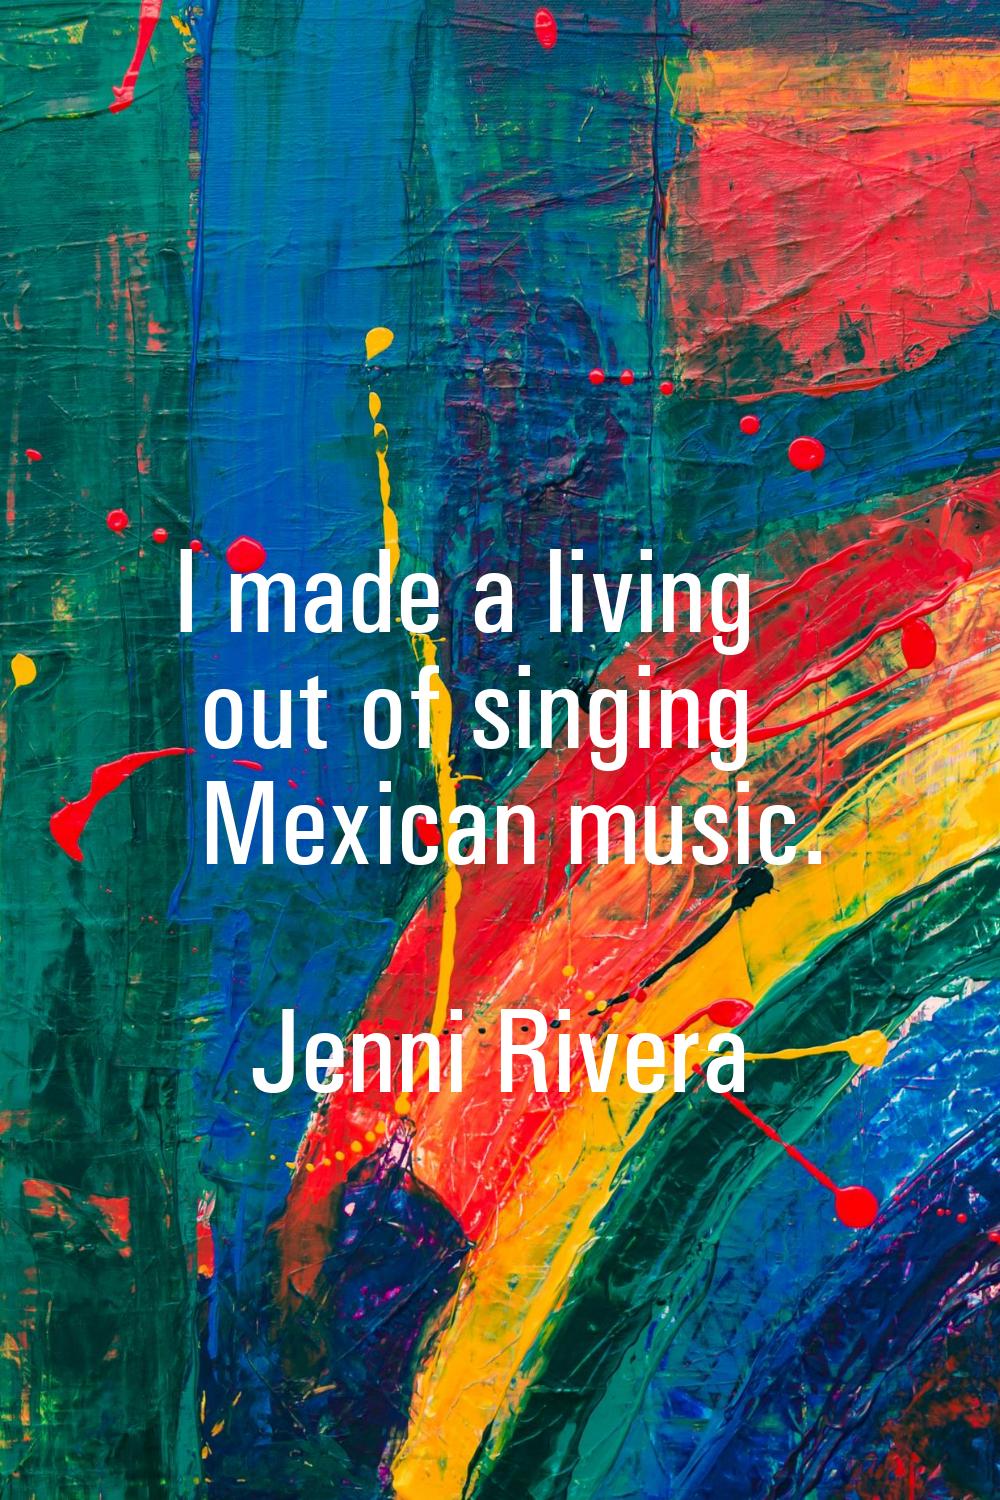 I made a living out of singing Mexican music.